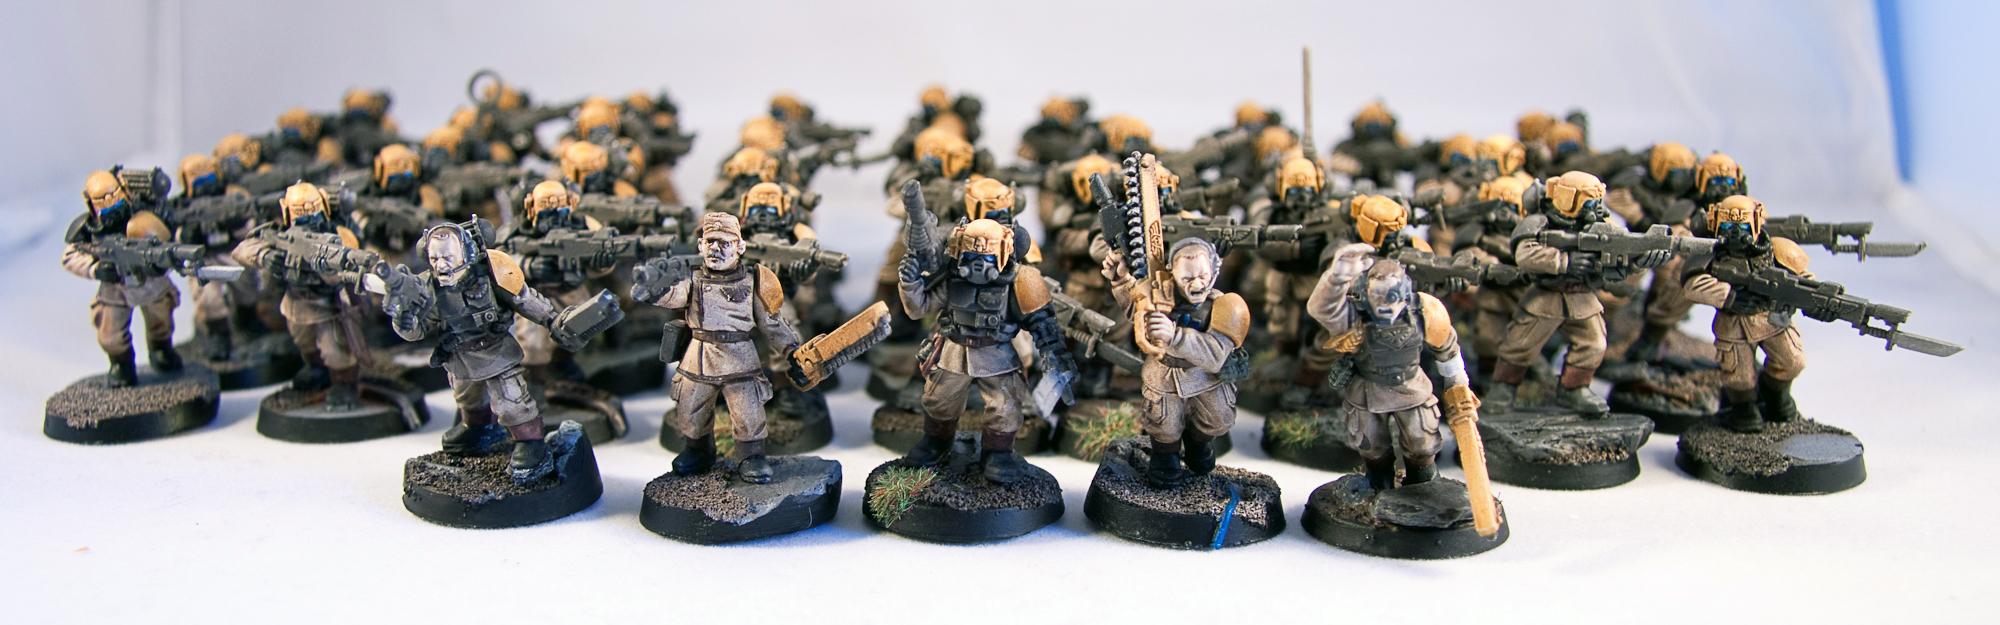 Imperial Guard, Infantry, Platoon